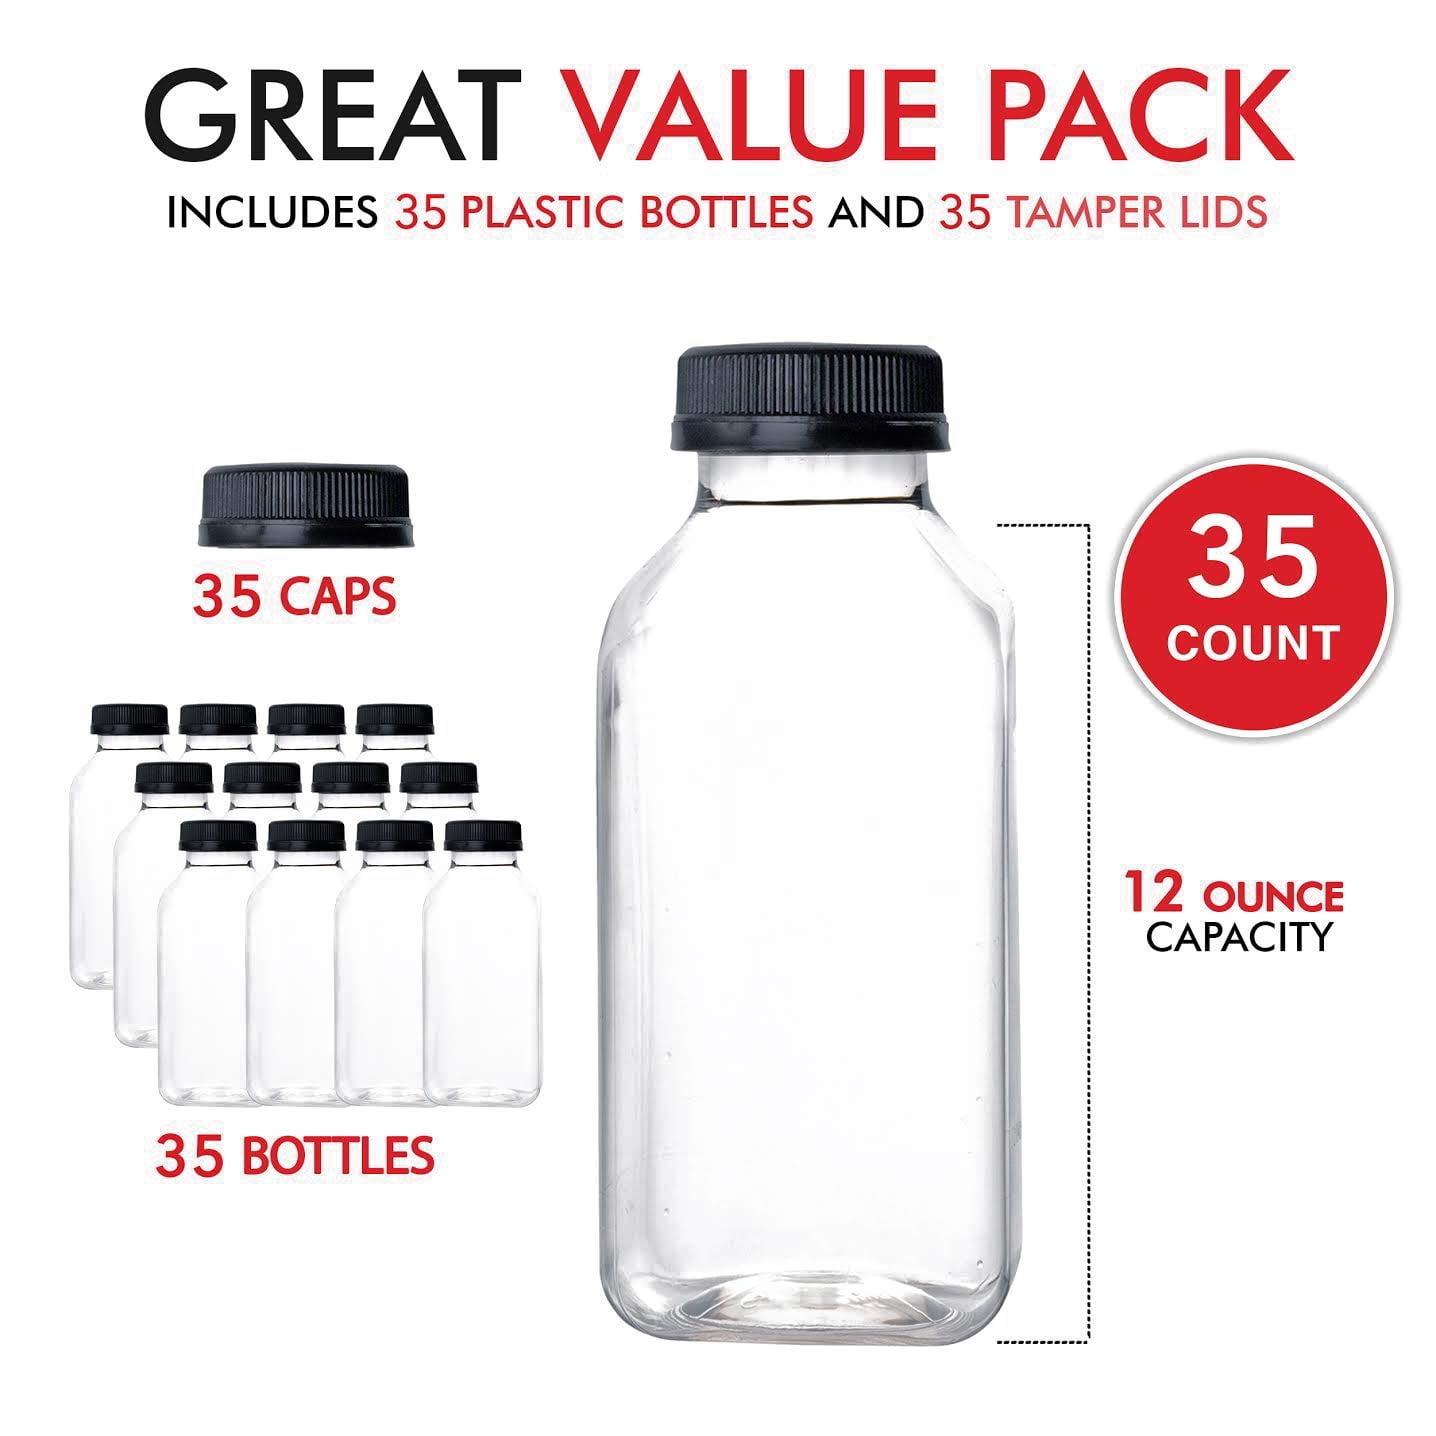 12 oz Juice Bottles with Caps for Juicing (35 pack) - Reusable Clear Empty  Plastic Bottles - 12 Oz D…See more 12 oz Juice Bottles with Caps for